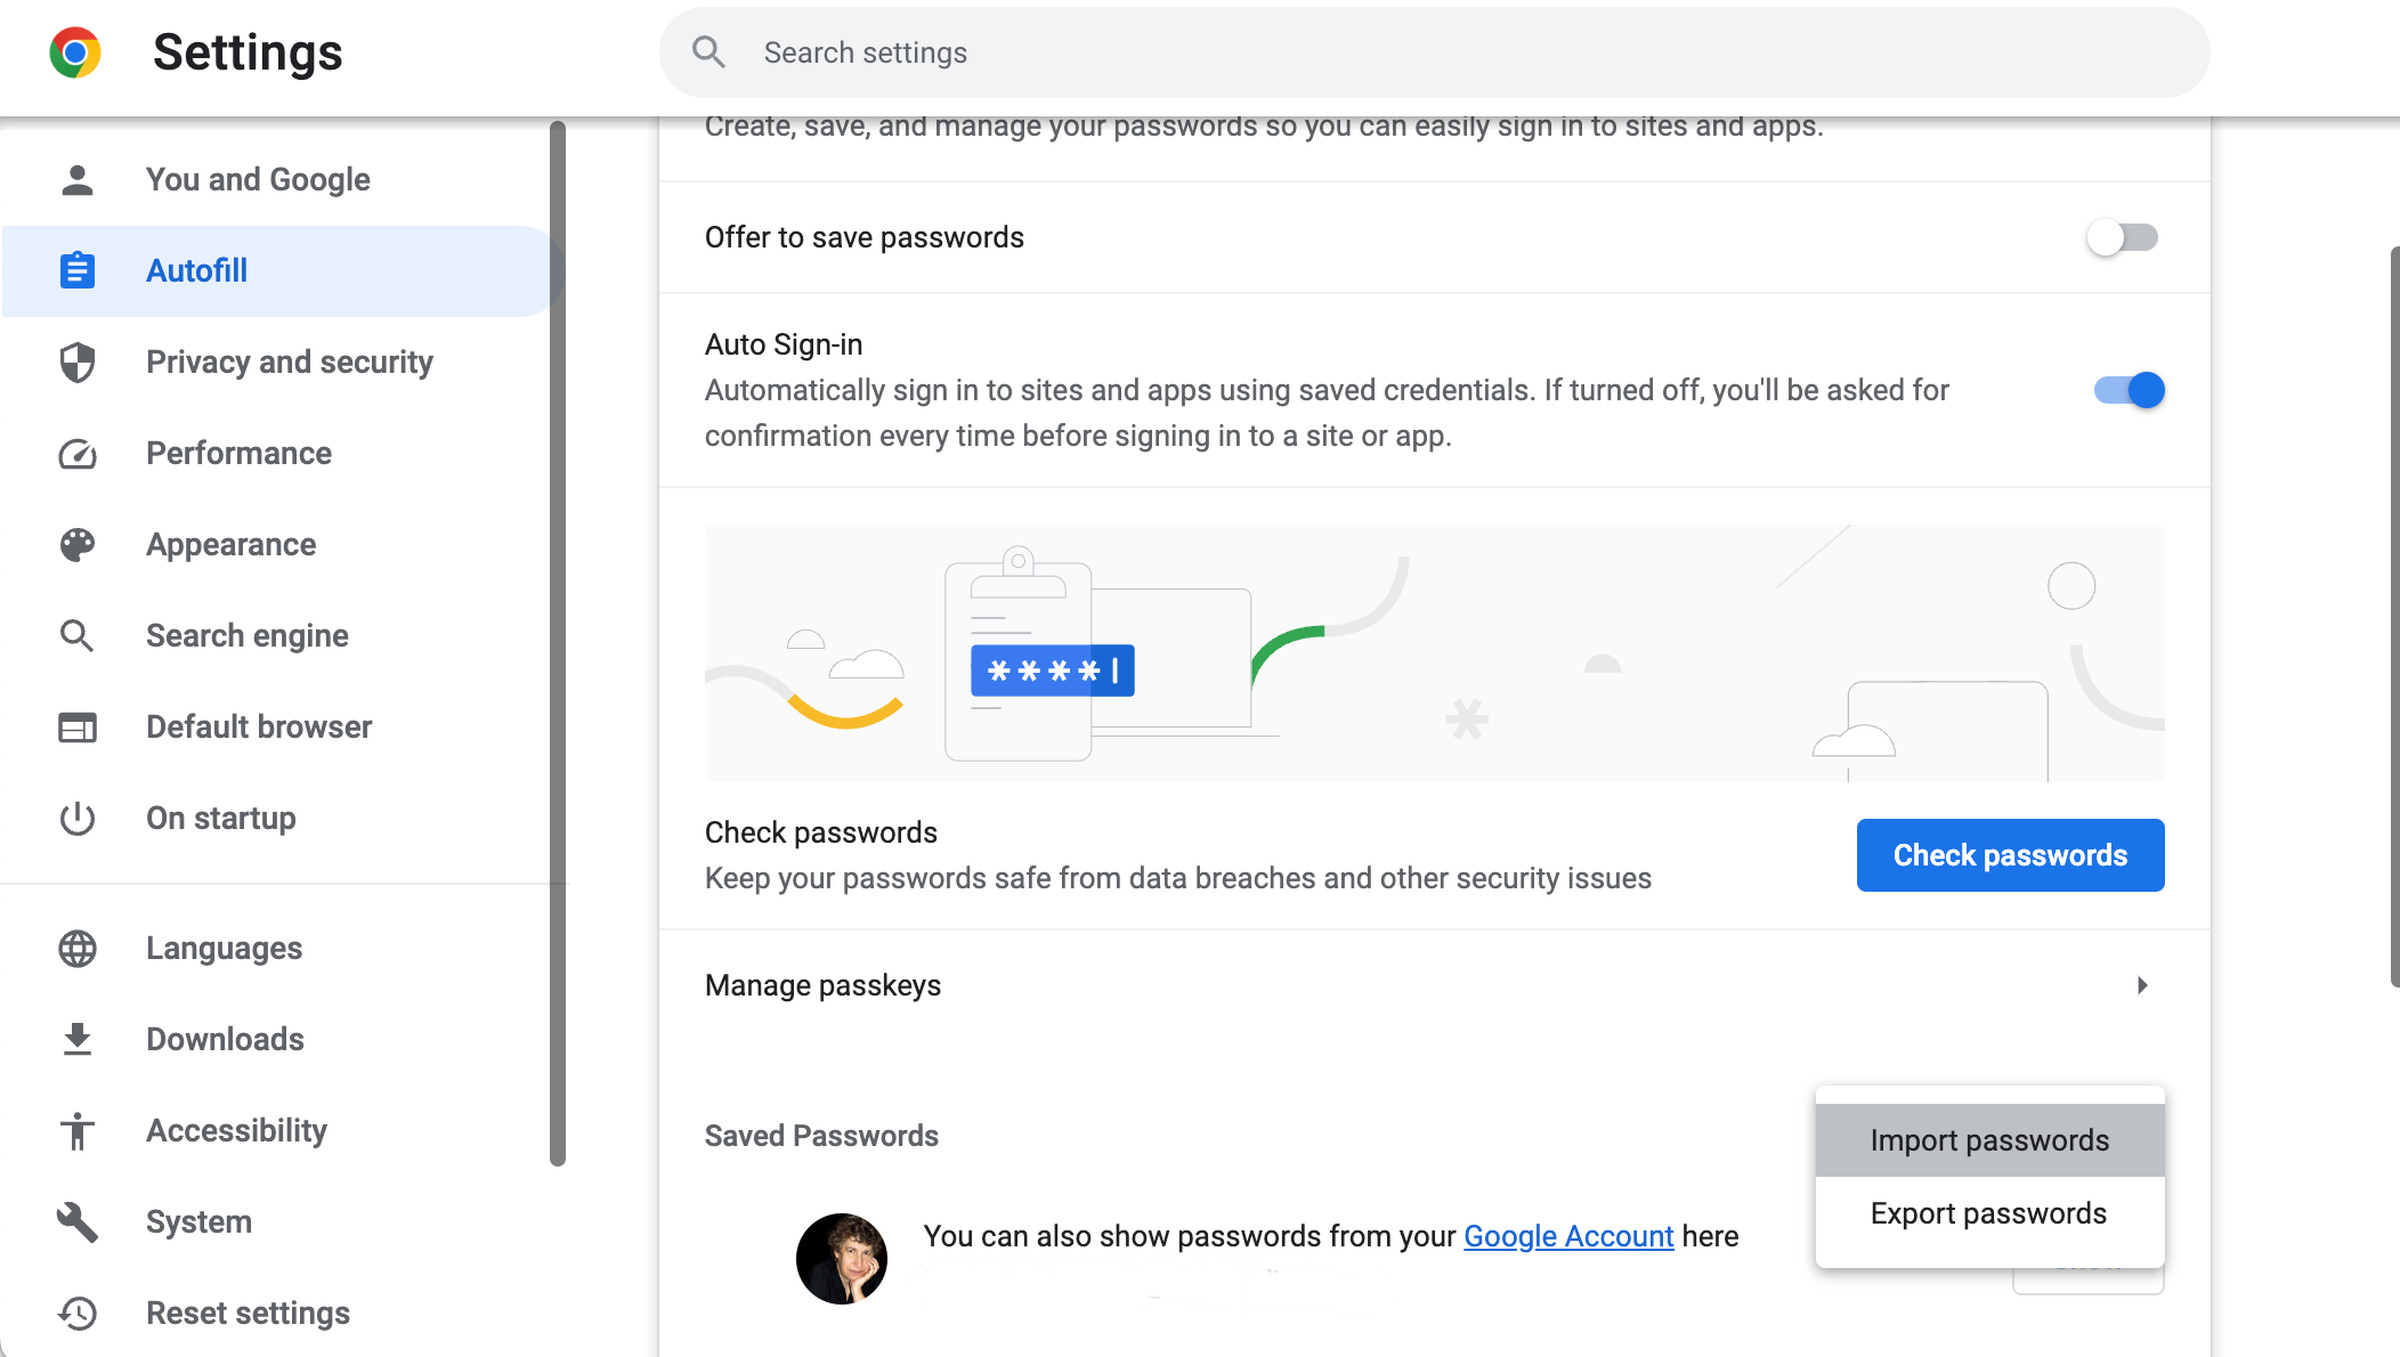 Settings page showing password manager settings.